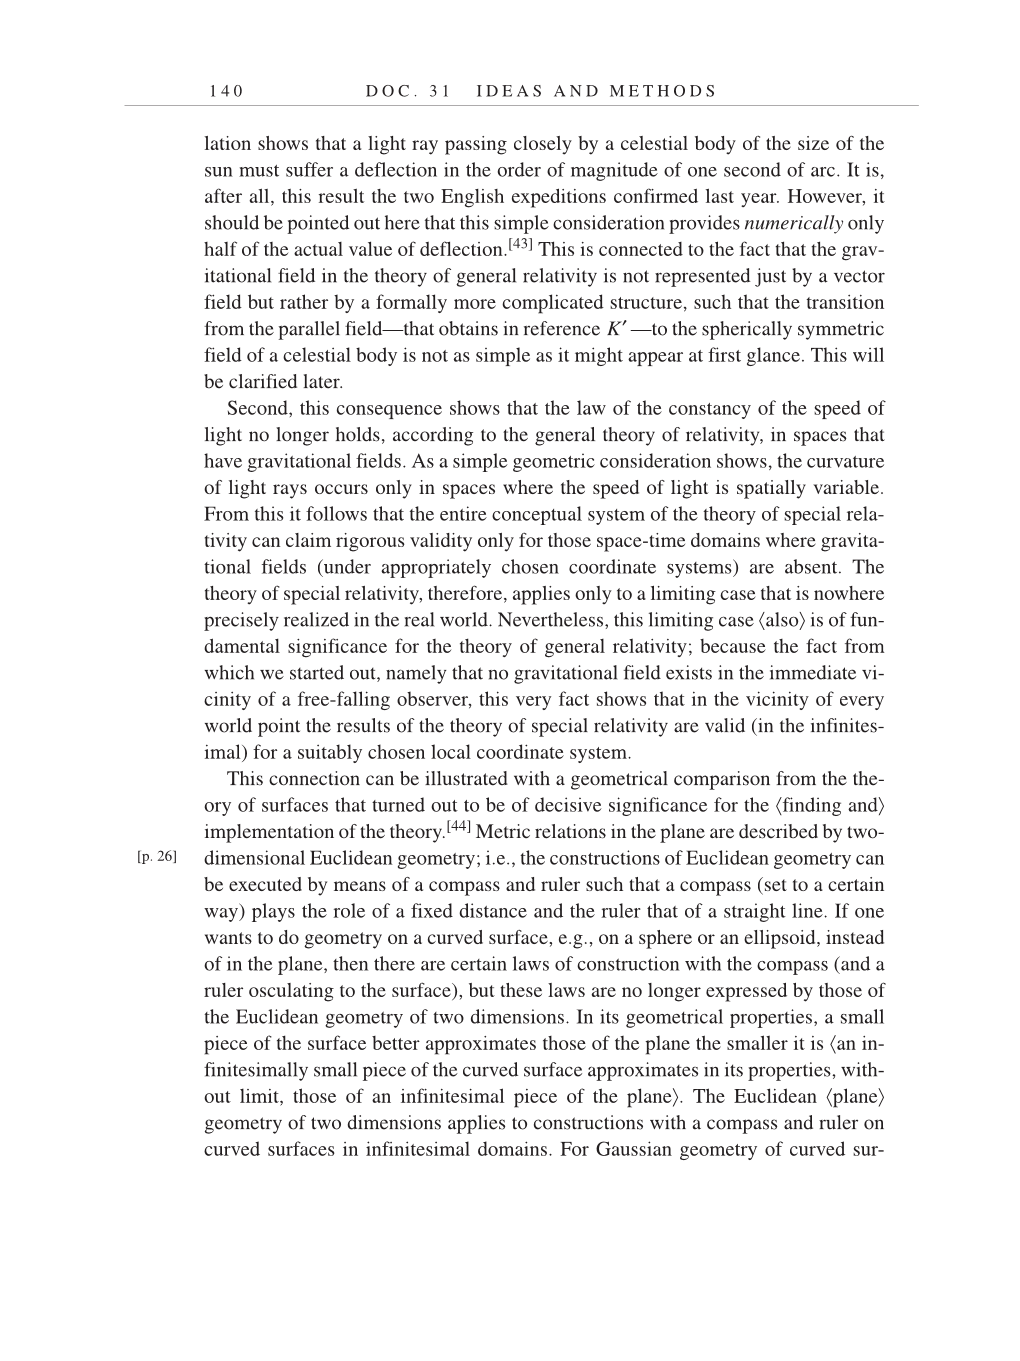 Volume 7: The Berlin Years: Writings, 1918-1921 (English translation supplement) page 140